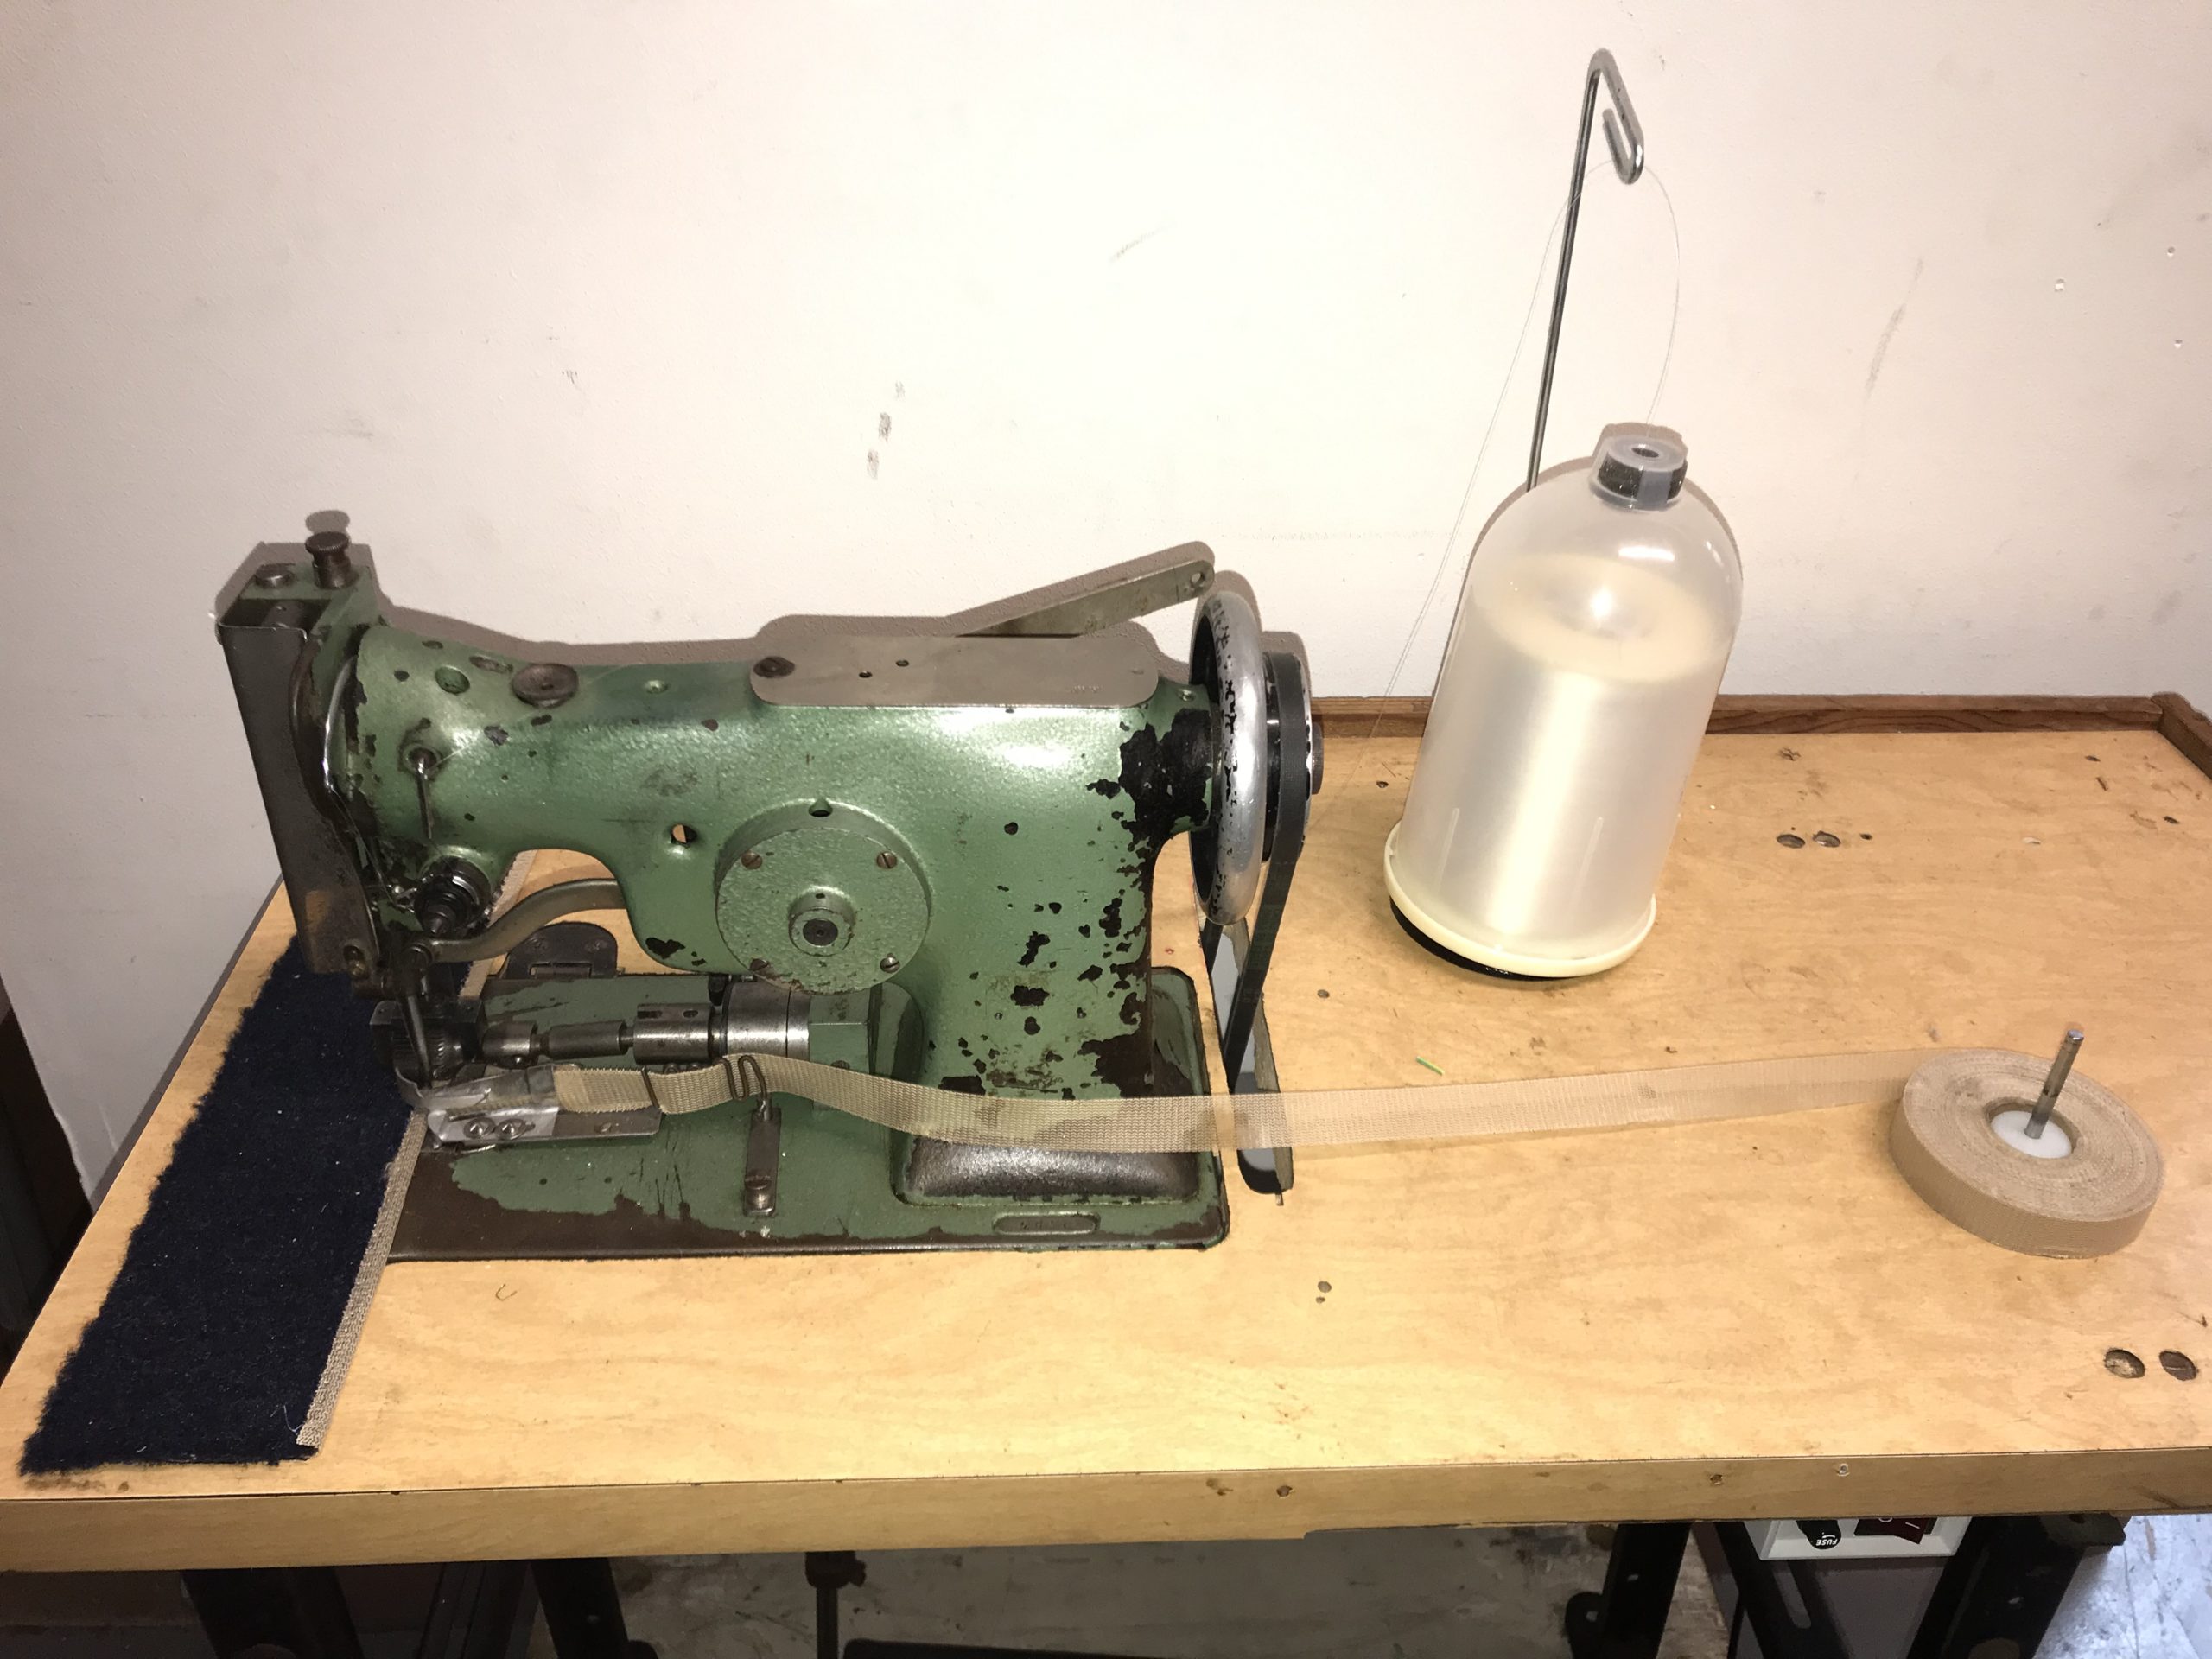 BOBTHEBINDER * Carpet Binding and Serging - household items - by